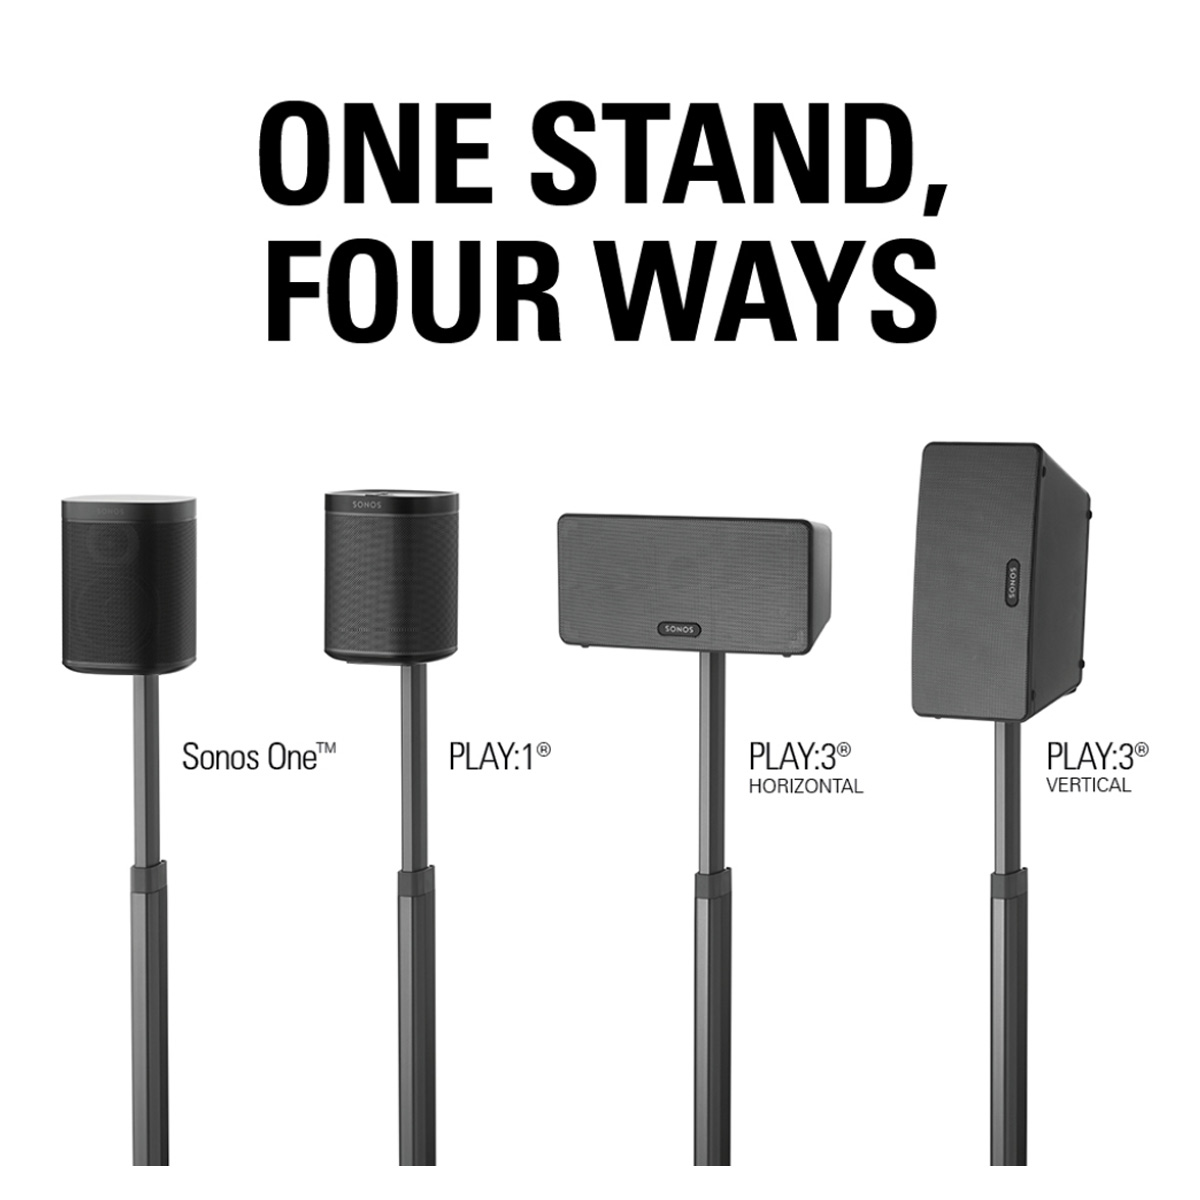 Sanus WSSA2 Adjustable Height Wireless Speaker Stands for Sonos ONE, PLAY:1, and PLAY:3 - Pair (Black) - image 4 of 4